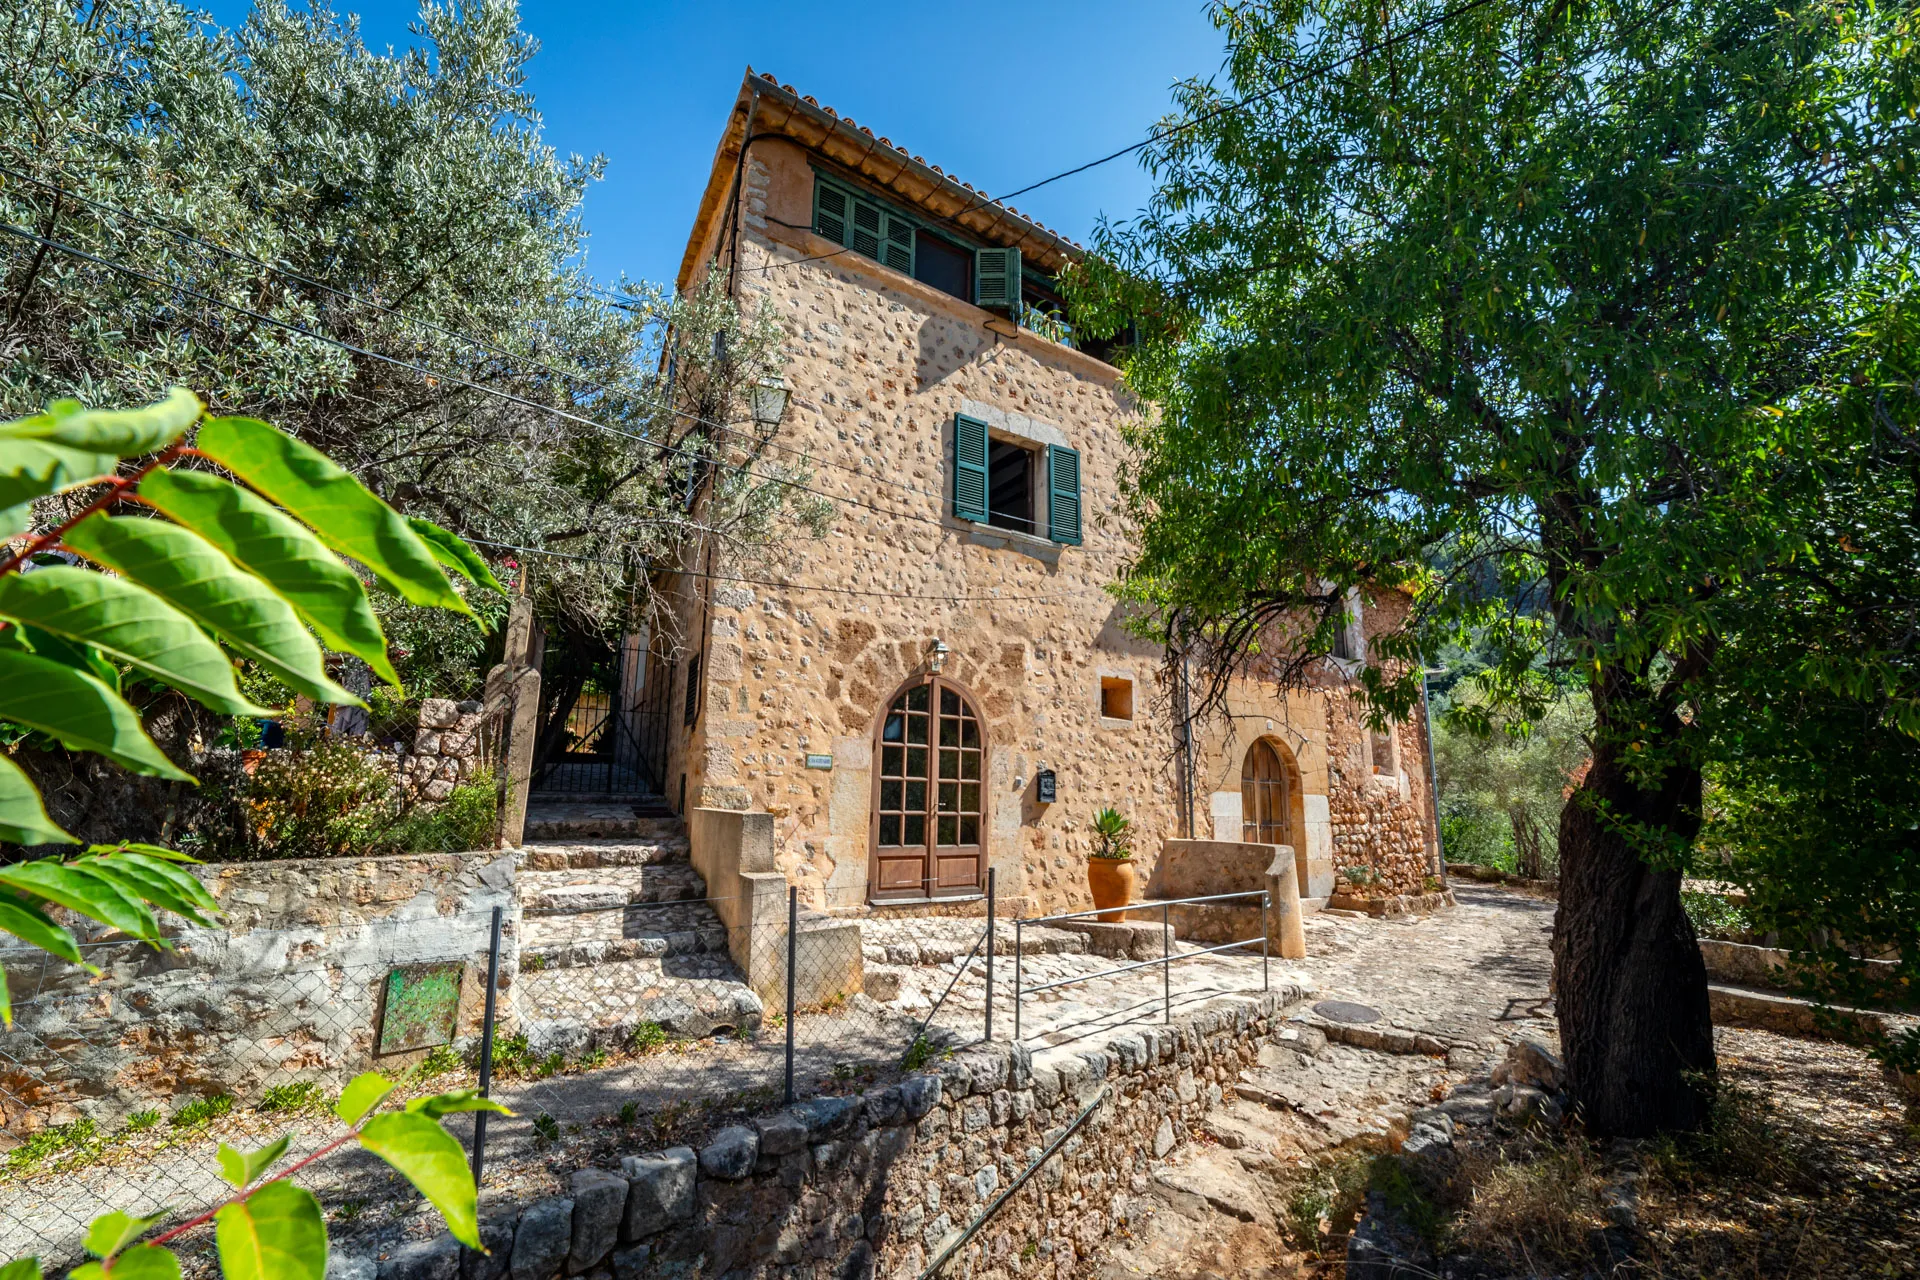 Traditional 3-story village house near Fornalutx with 3 bedrooms, rooftop office and stunning views. Features gardens, pool, guest house and potential for conversion or extension.